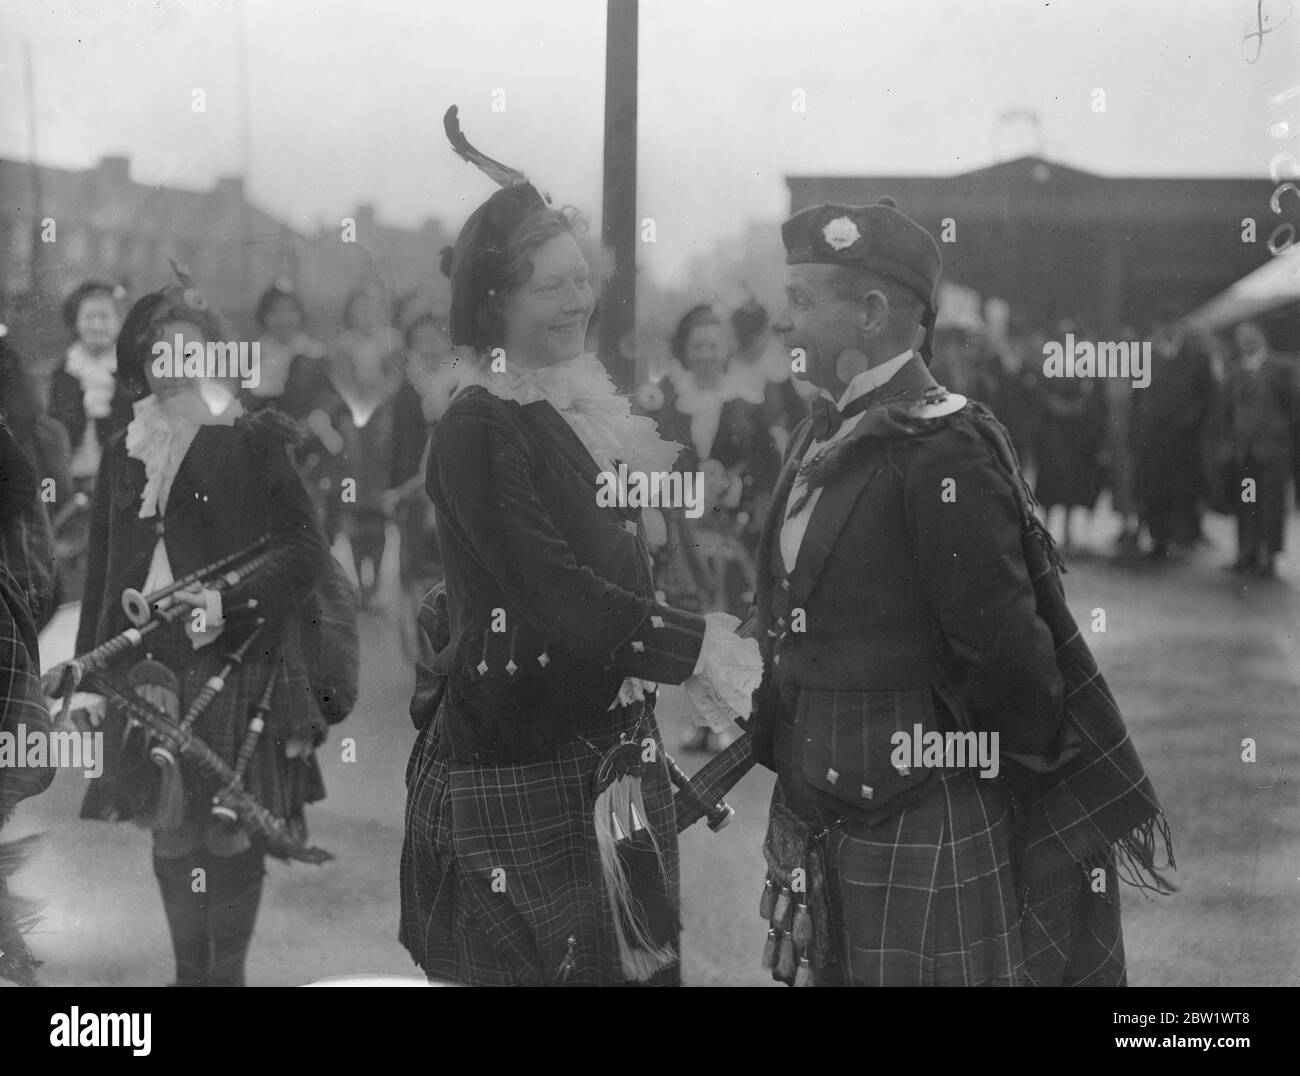 Dagenham Girl Pipers welcomed their new 'Chieftain'. Pipe Maj George Greenfield of the Royal Scots, recognised as one of Scotland's greatest experts on the bagpipes and Highland Dances, was met at Heathway station (District Railway) by the band of the Dagenham Girl Pipers in full uniform when he arrived at Dagenham, Essex, to become Pipe Maj of the Girl Pipers. George Greenfield enlisted in the Royal Scot as a boy piper and has now completed his 21 years service. As 'Chieftain' of the Dagenham Girl Pipers he will be responsible for the piping and dancing instruction of over 50 girls. Photo sho Stock Photo